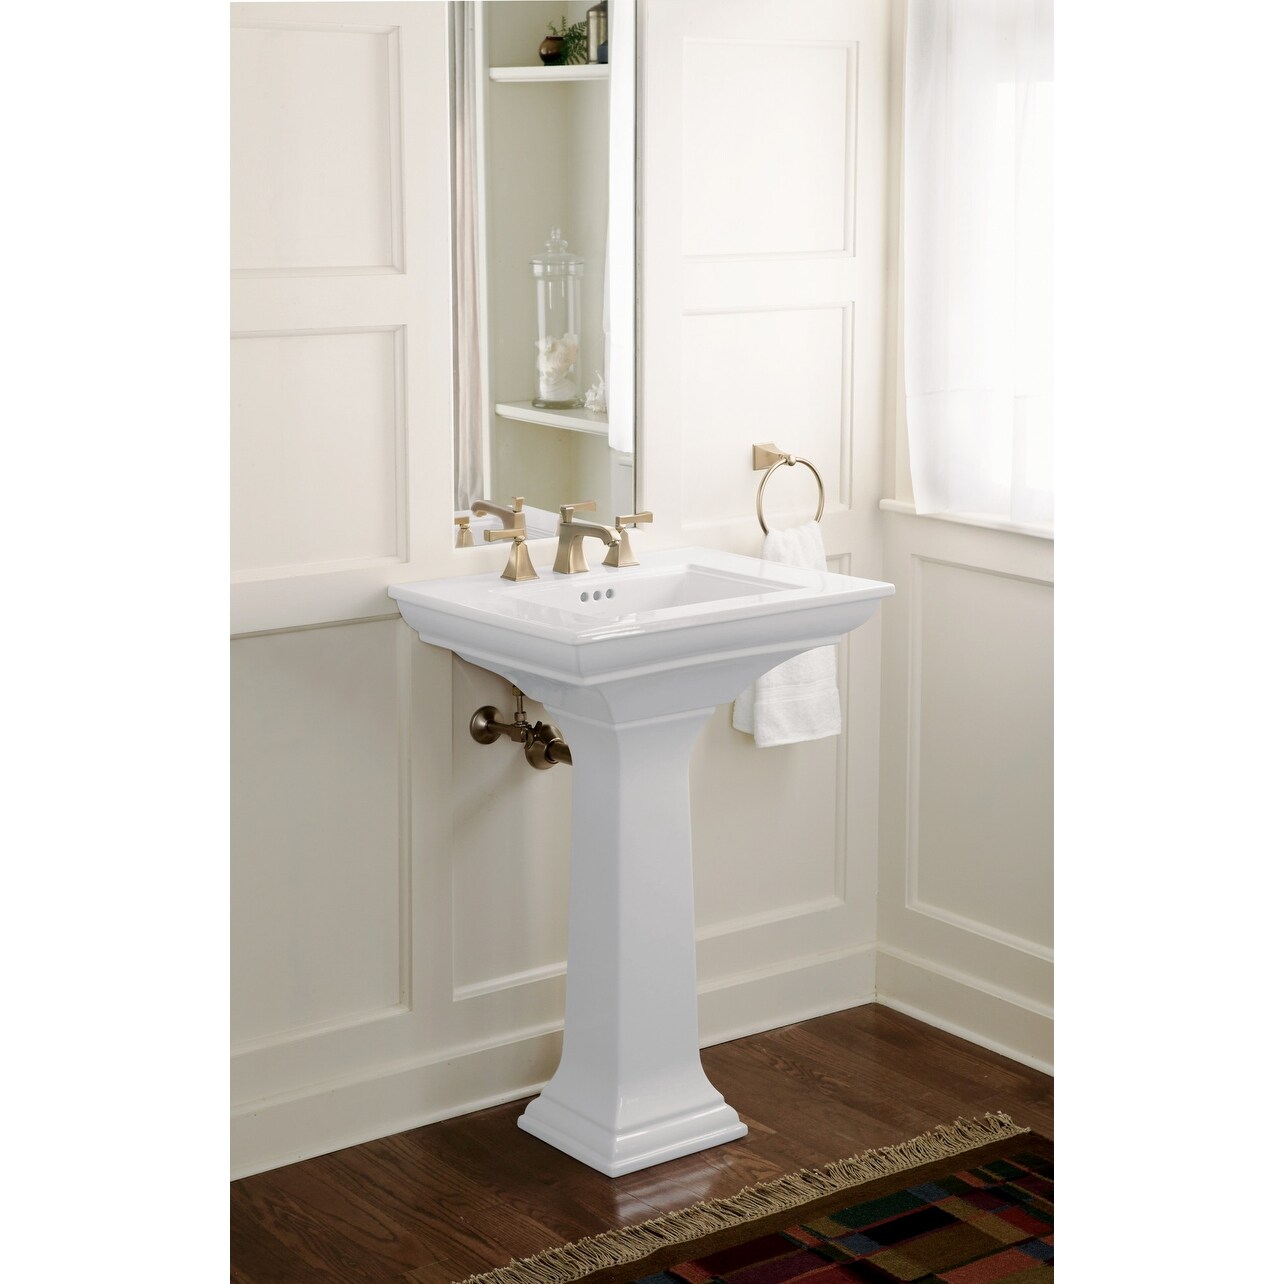 Kohler K 2345 8 Memoirs Stately 24 1 2 Fireclay Pedestal Bathroom Sink With 3 Holes Drilled And Overflow